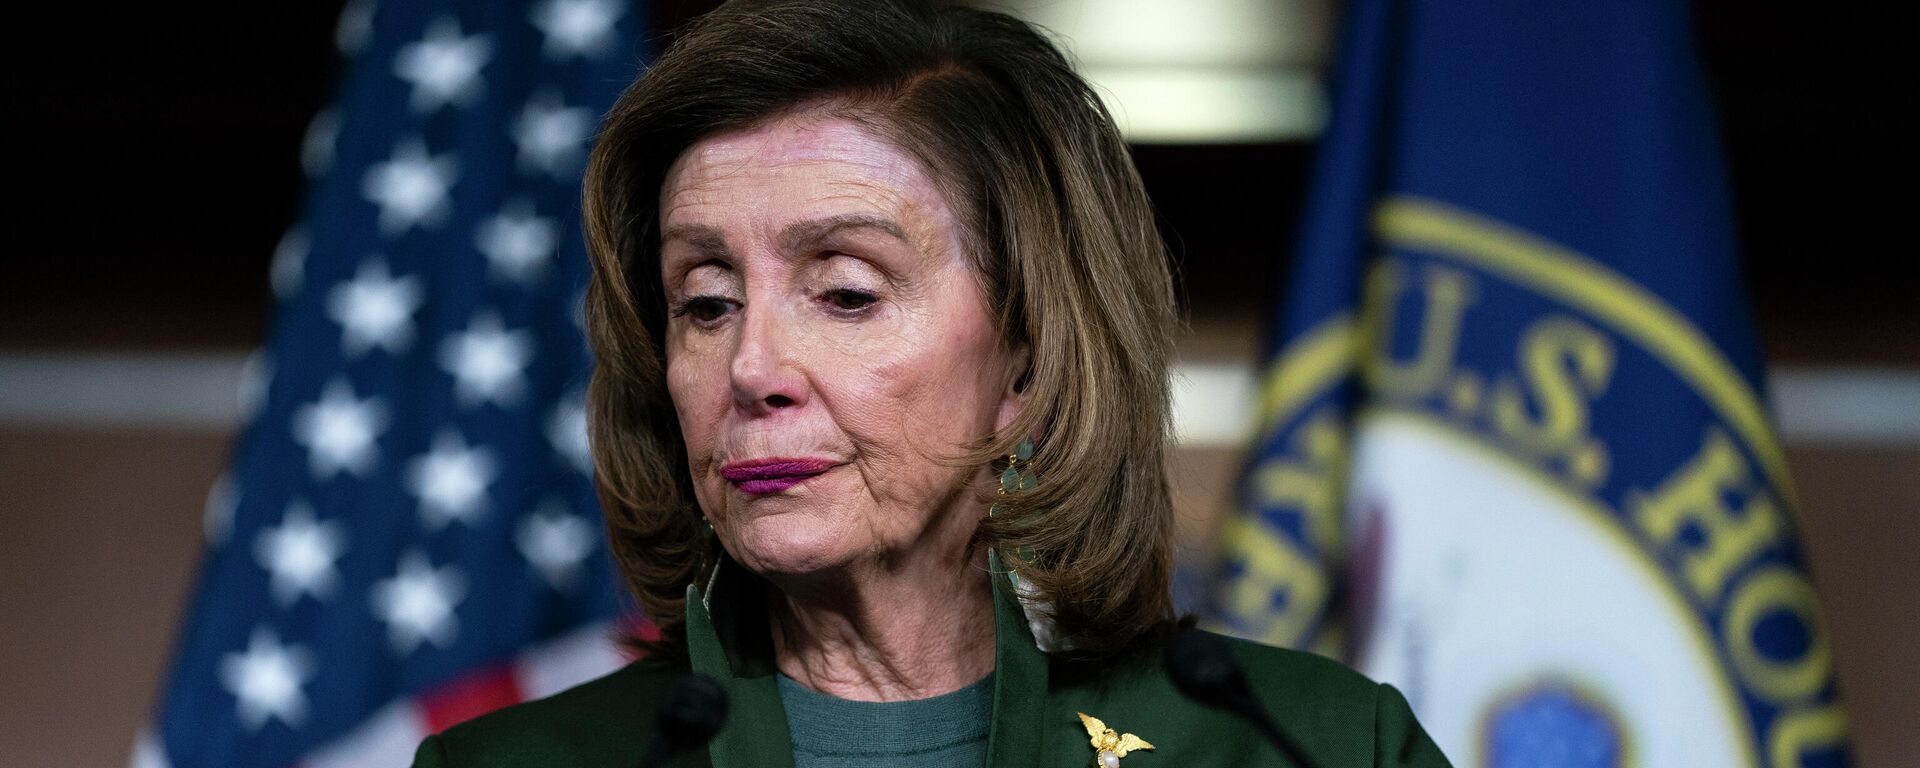 Speaker of the House Nancy Pelosi of Calif., pauses as she speaks during a news conference on Capitol Hill, Thursday, Feb. 3, 2022, in Washington - Sputnik International, 1920, 19.07.2022